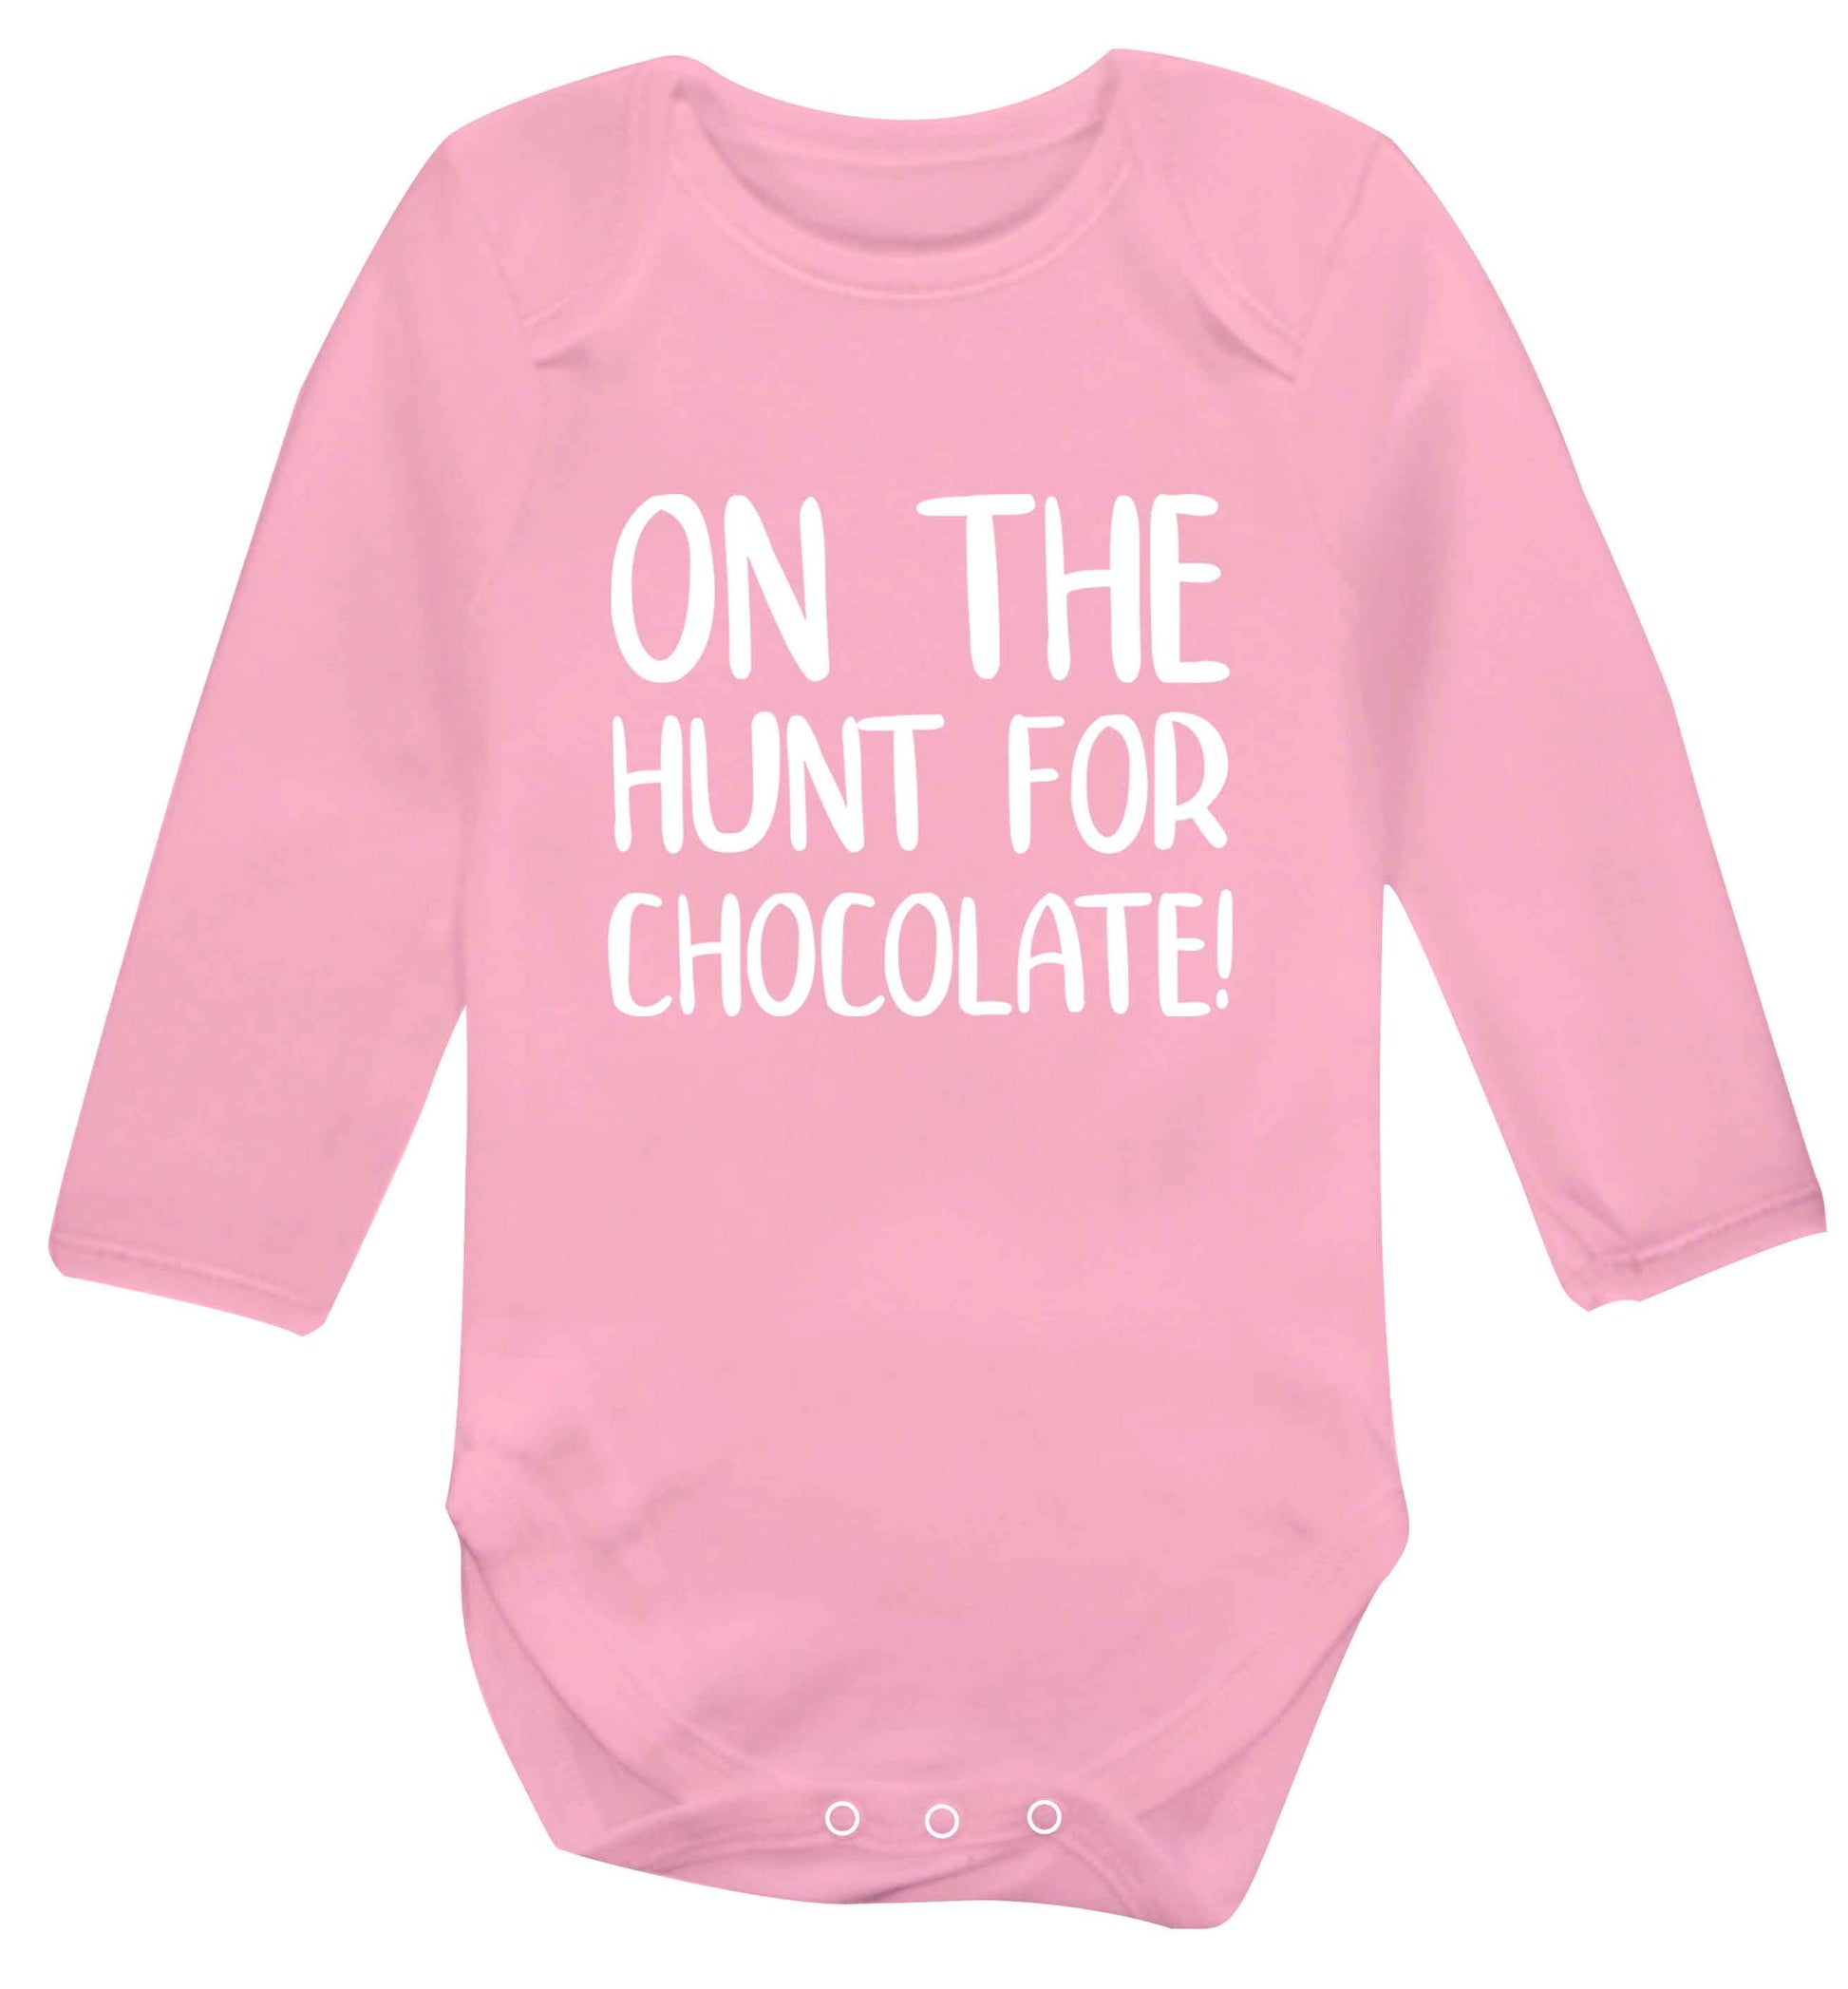 On the hunt for chocolate! baby vest long sleeved pale pink 6-12 months